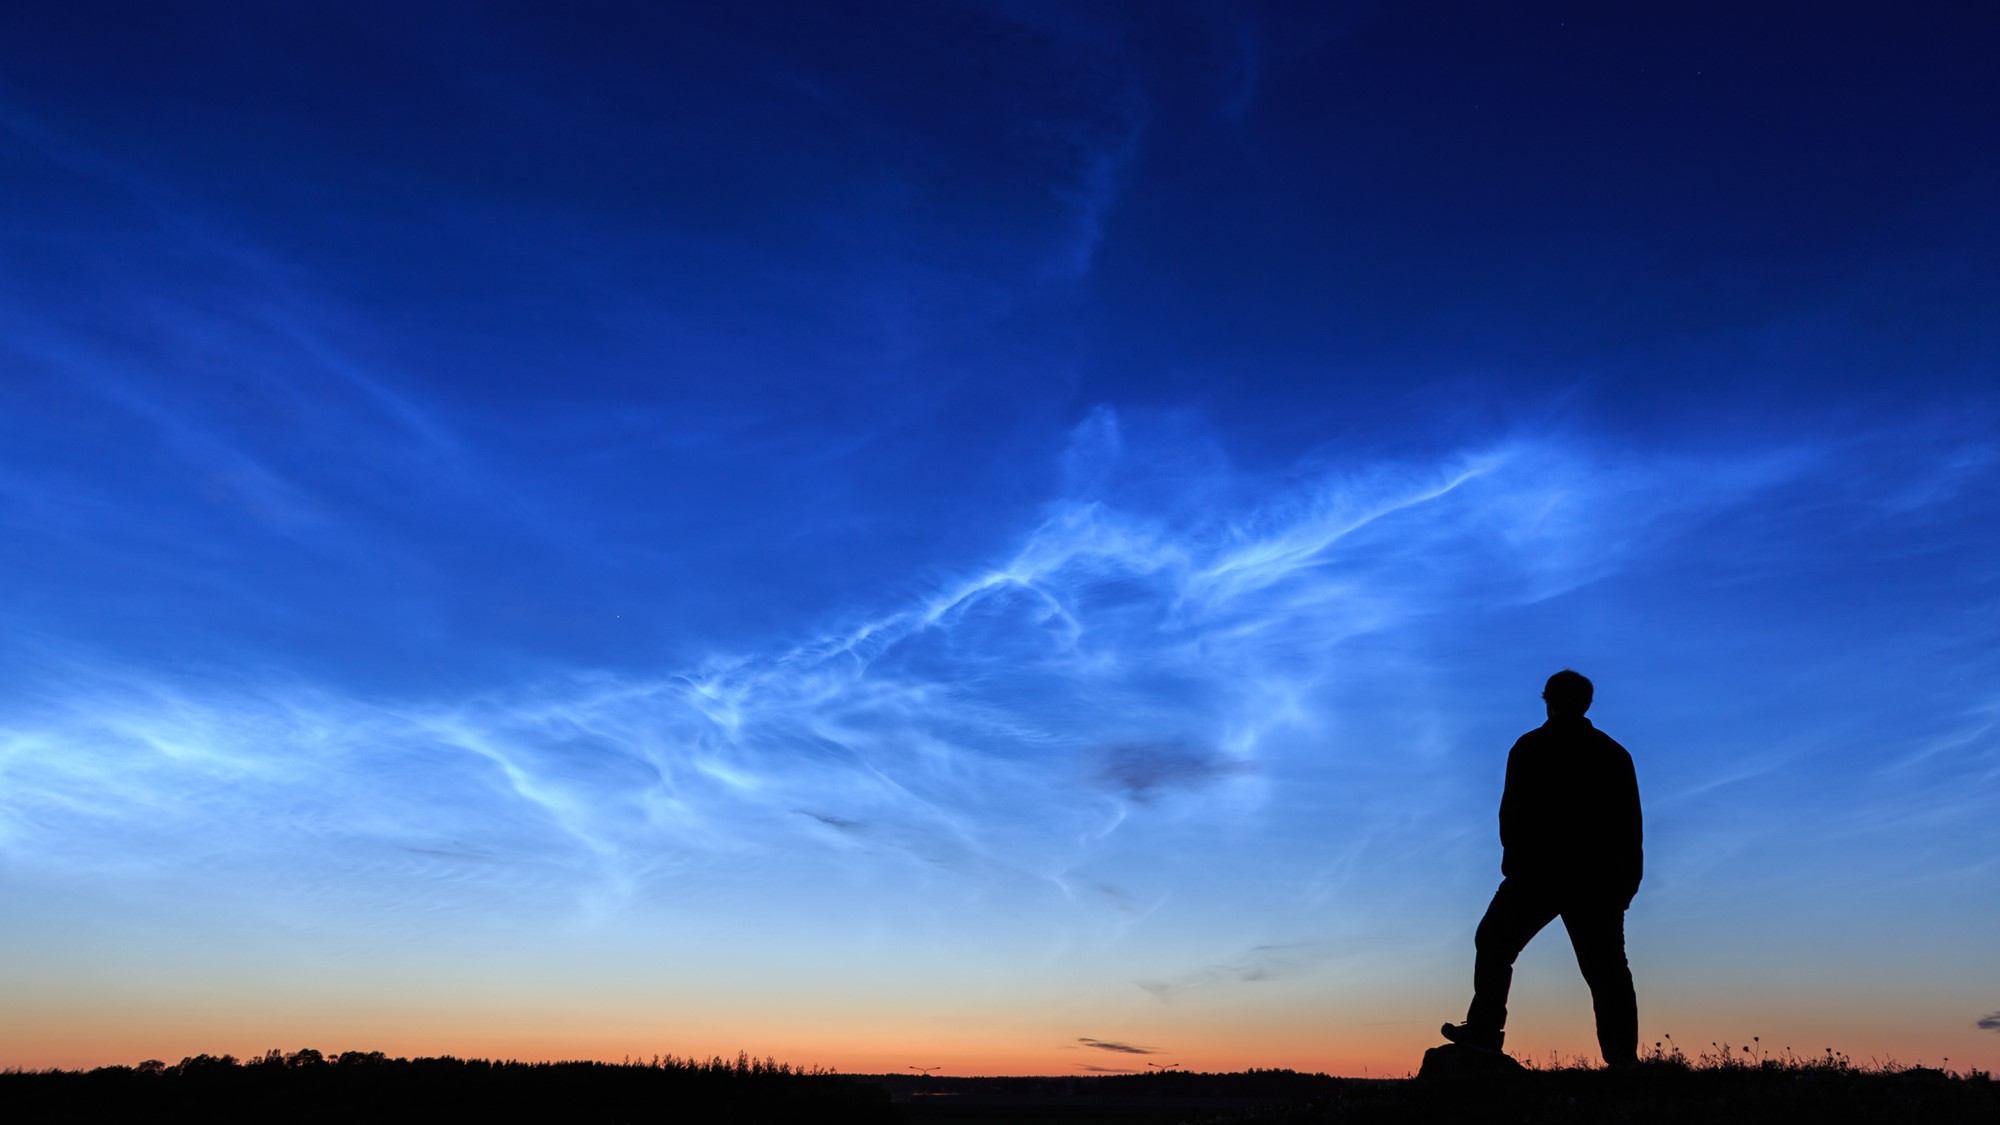 Silhouette of person against dark blue sky with wispy white noctilucent clouds.